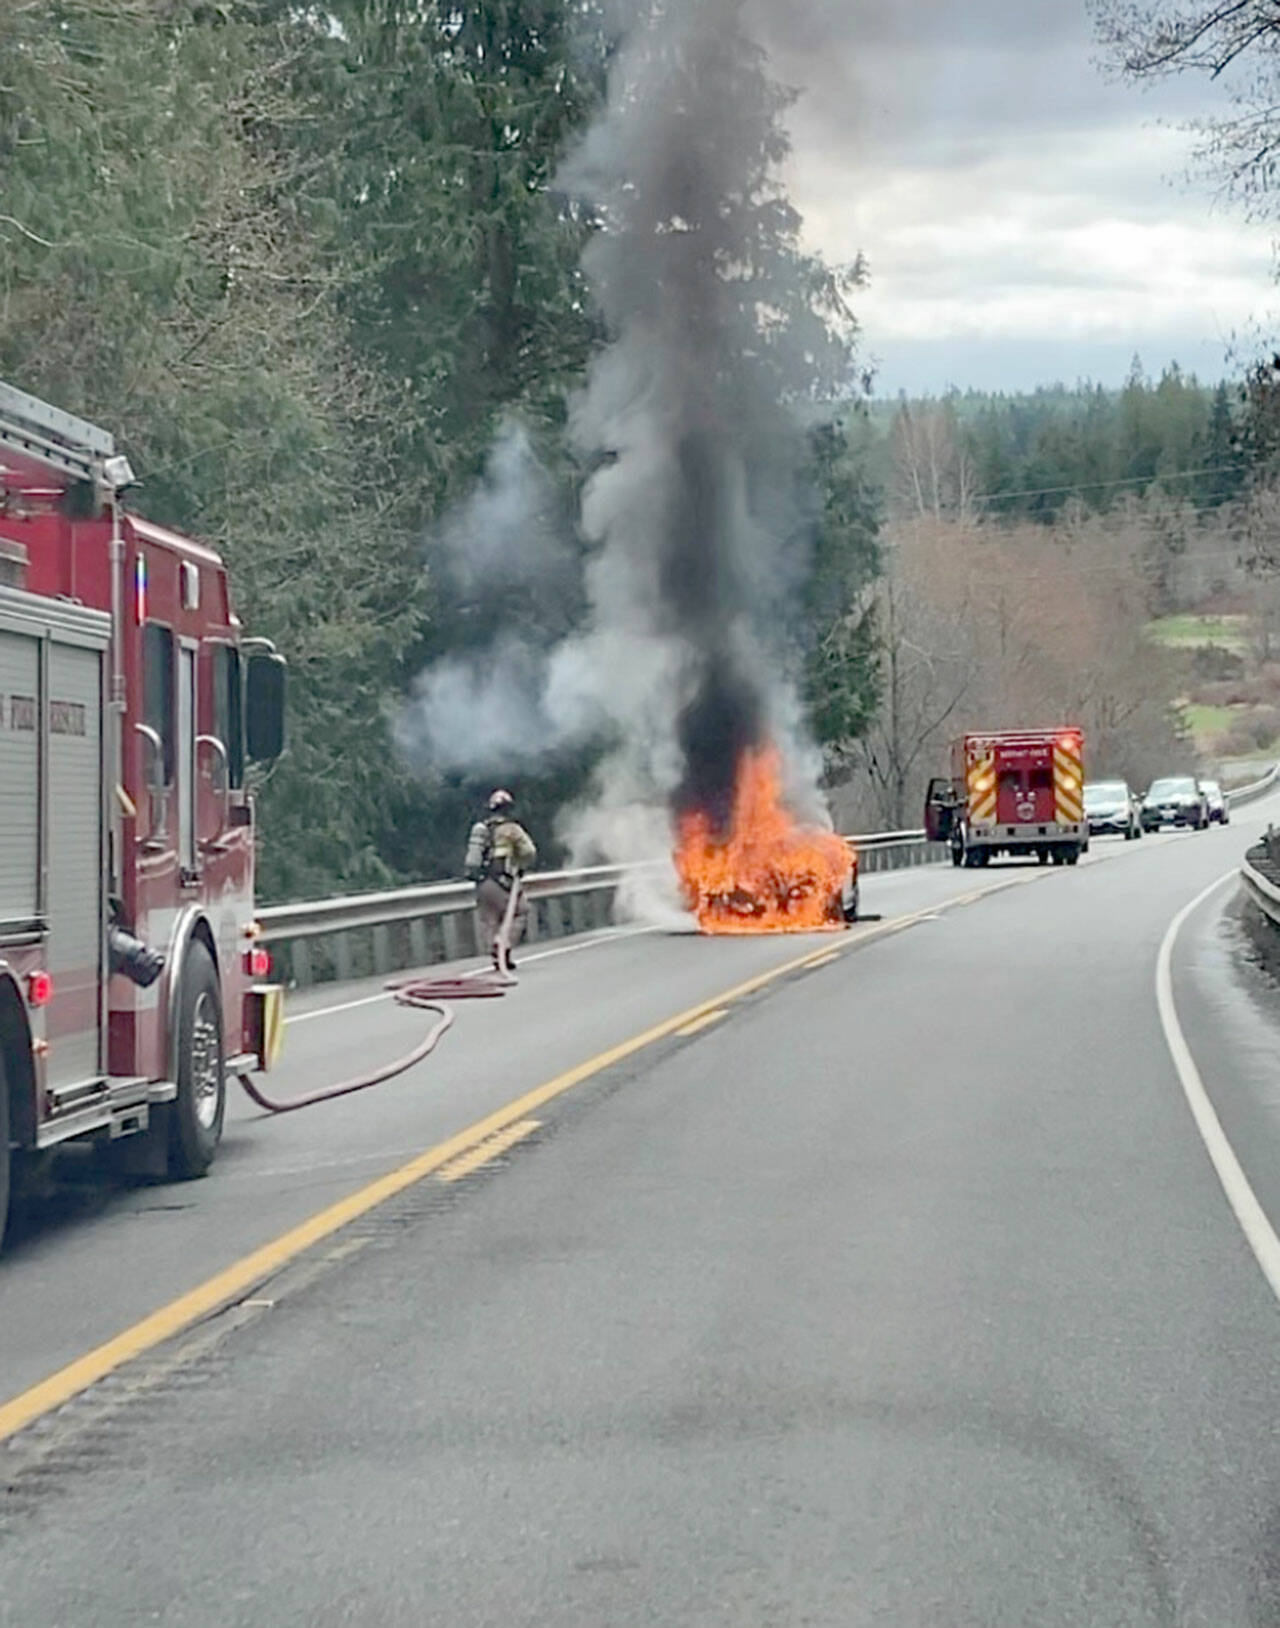 An East Jefferson Fire Rescue crew responded Wednesday afternoon to a car fire on state Highway 20. (East Jefferson Fire Rescue)